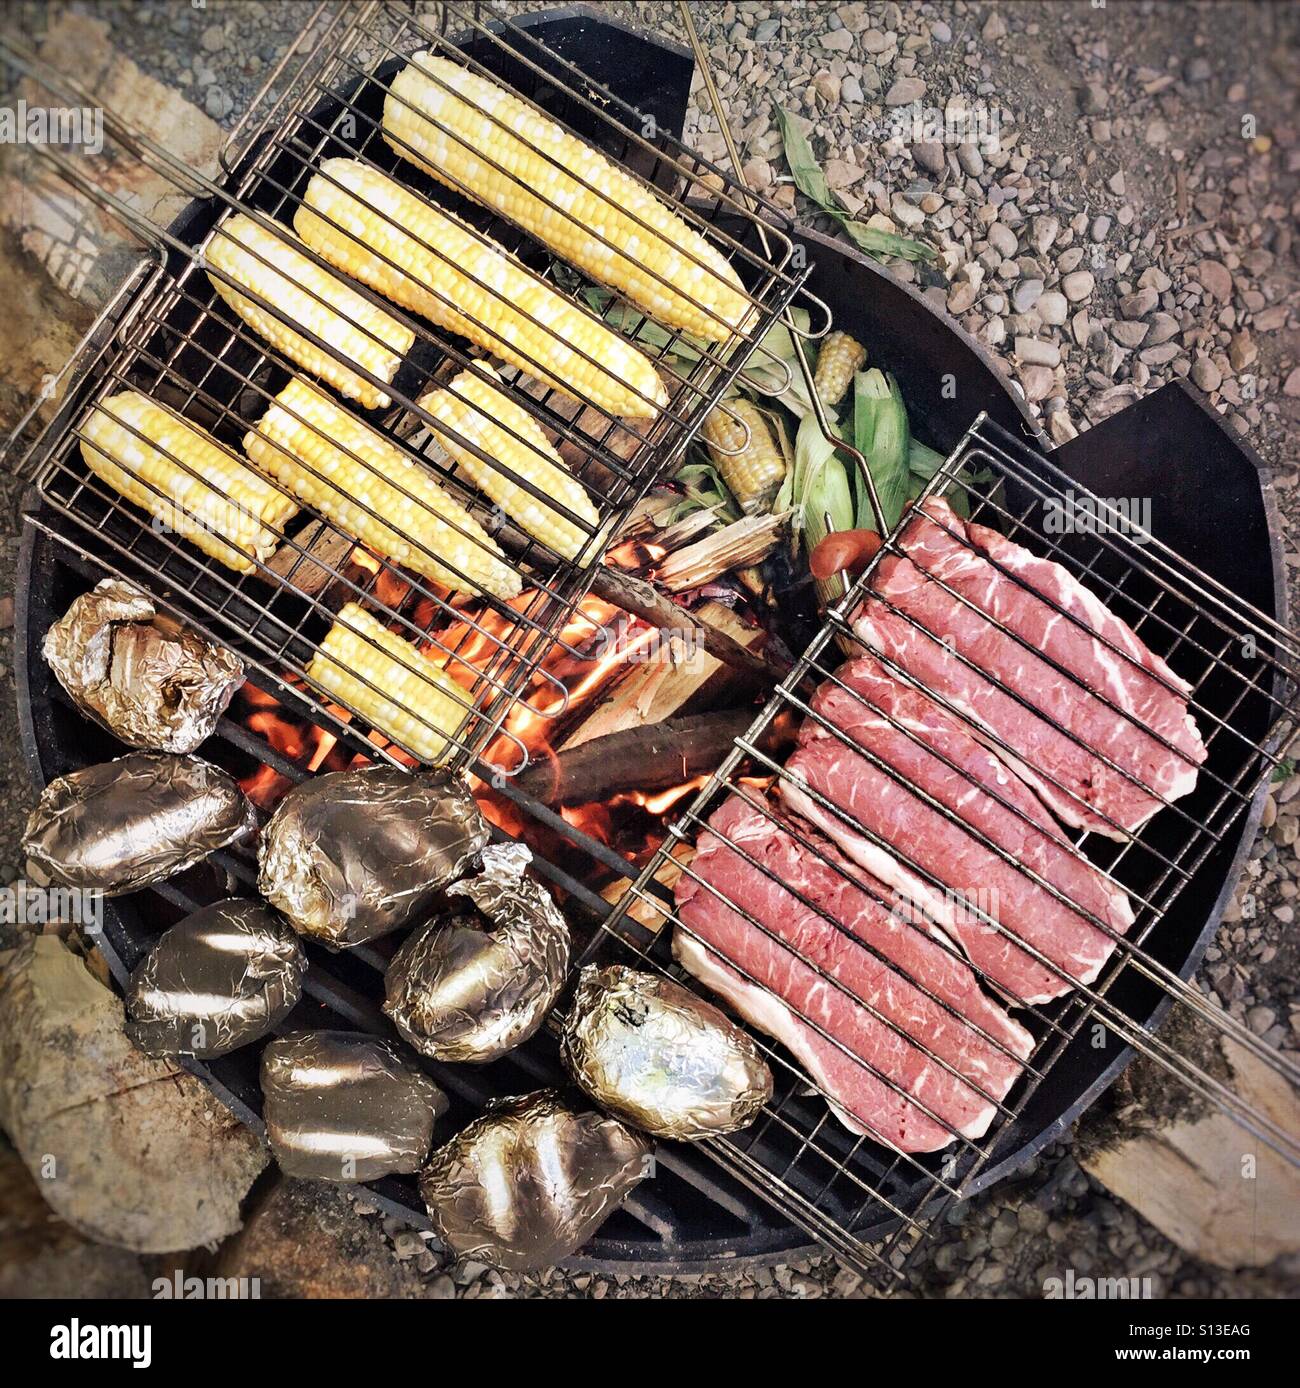 Steak corn and potatoes cook over an open fire. Stock Photo